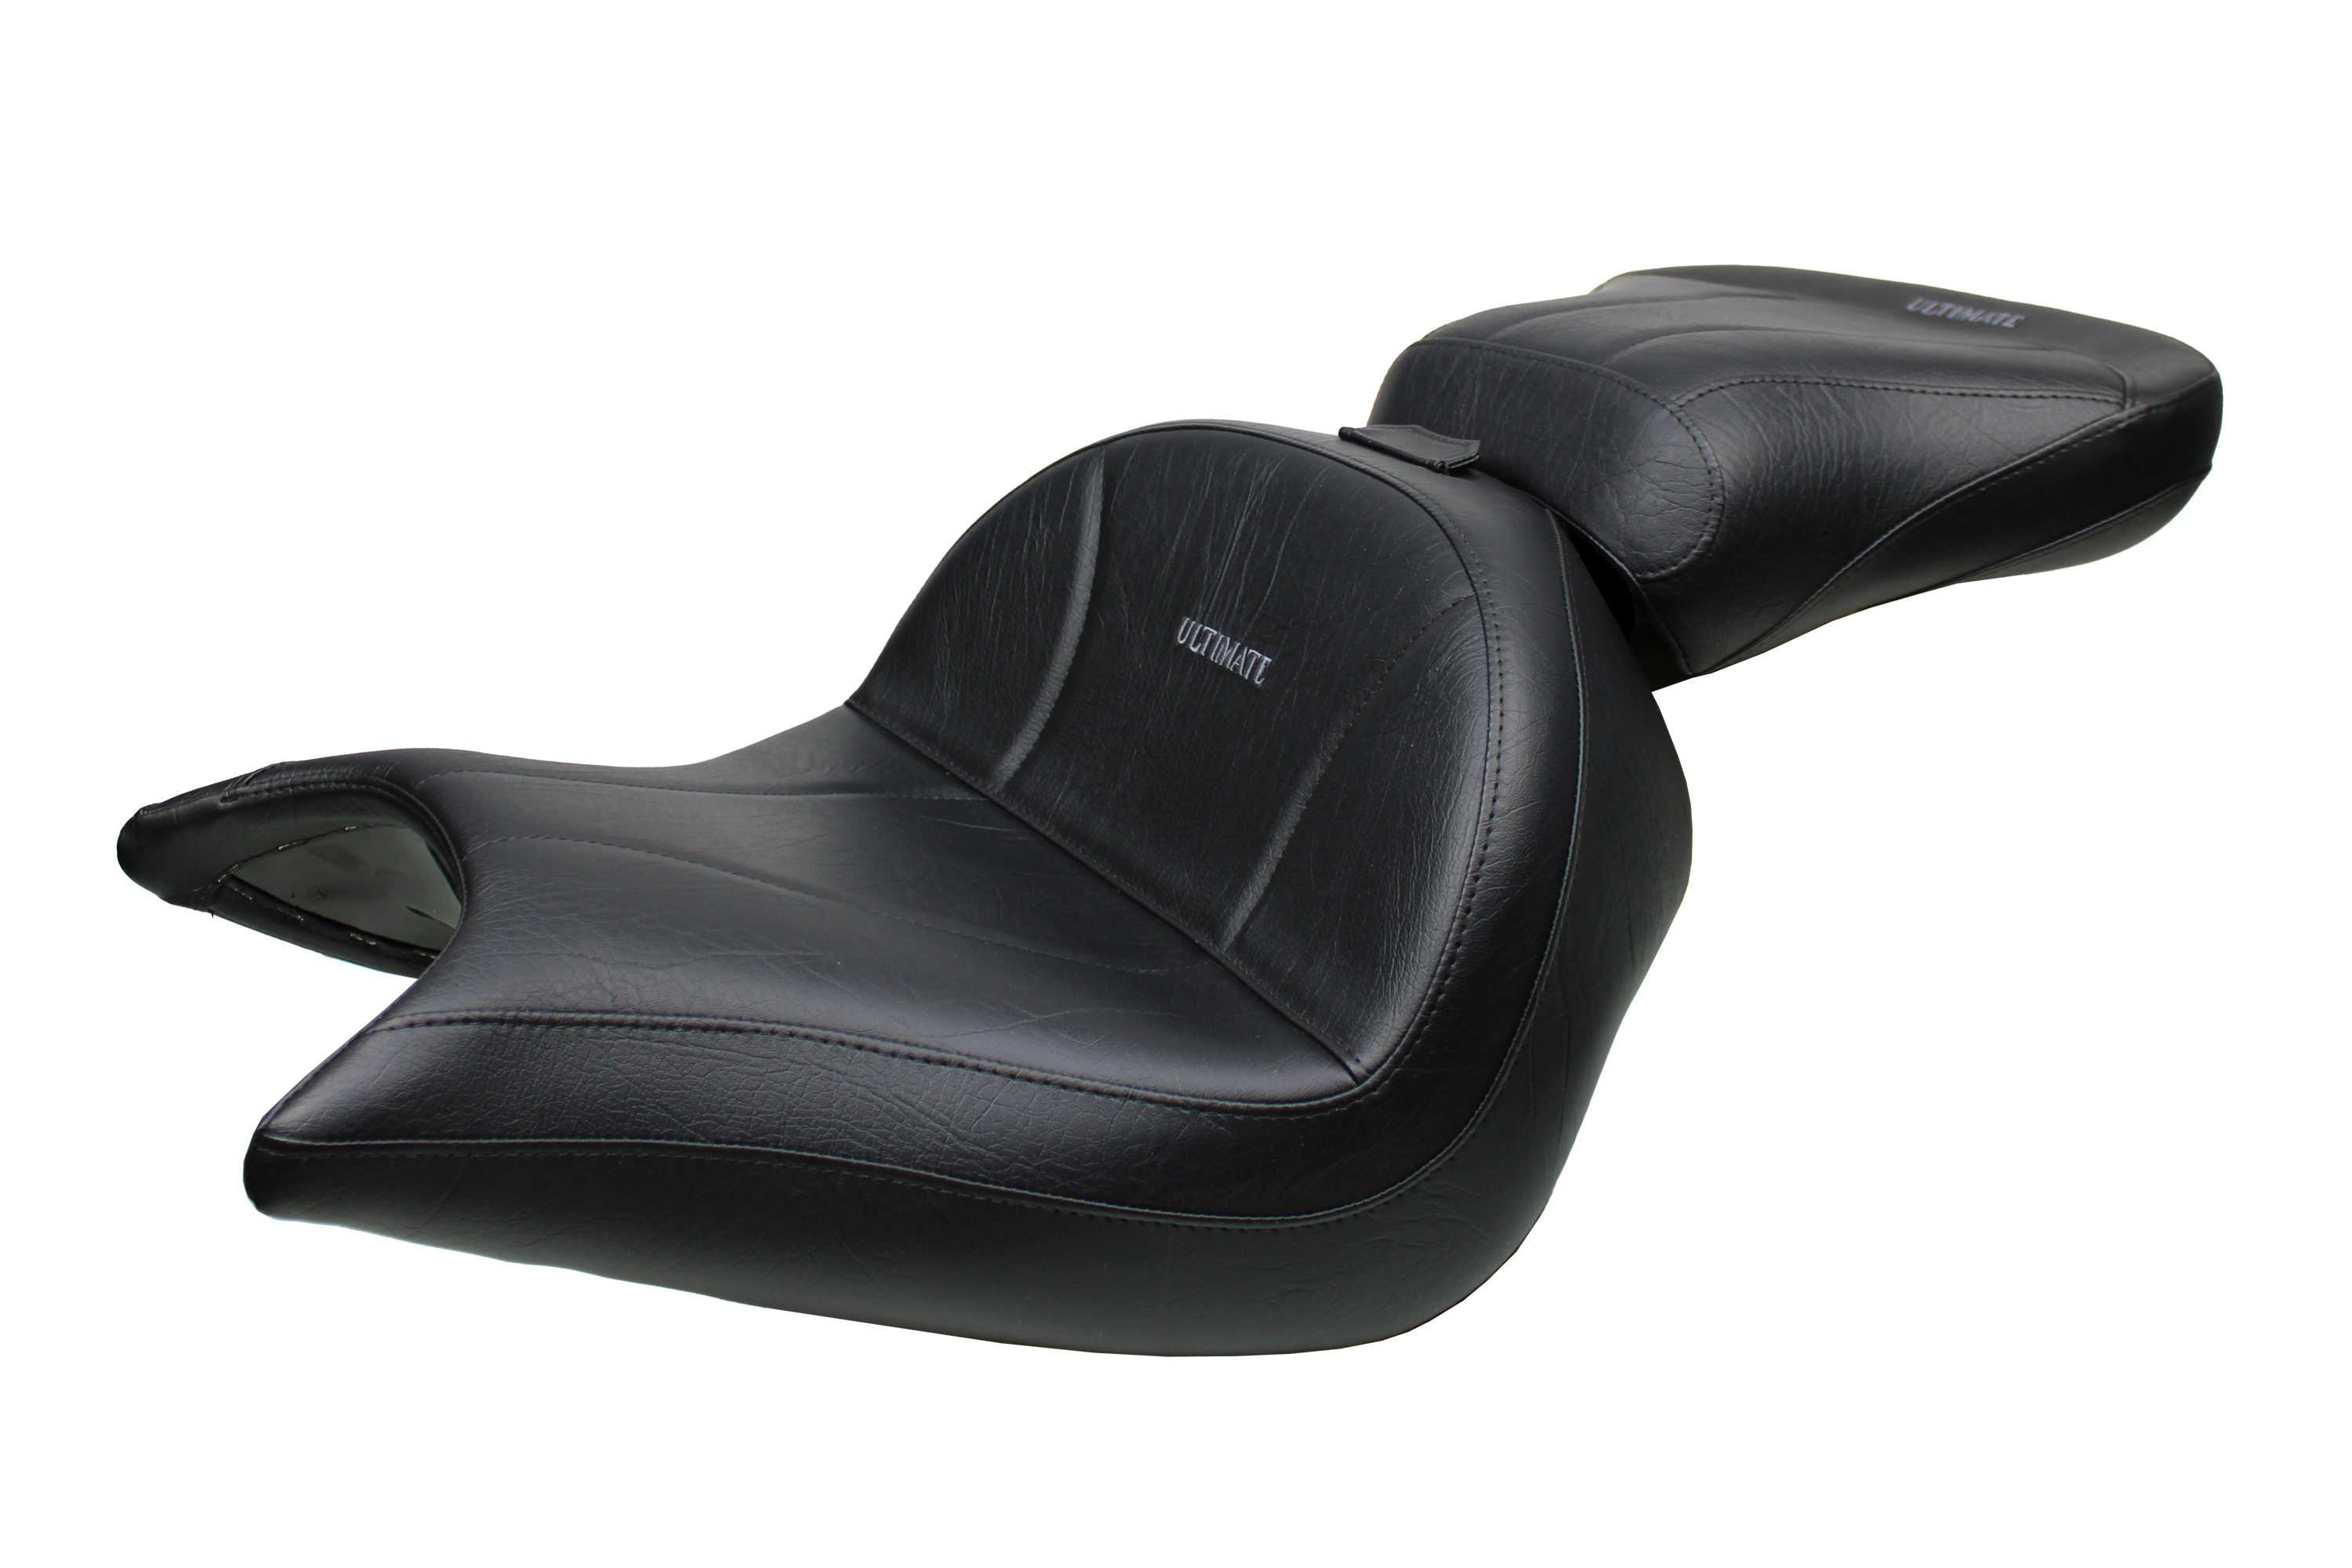 VTX 1800 N Neo Lowrider Seat and Passenger Seat - Plain or Studded